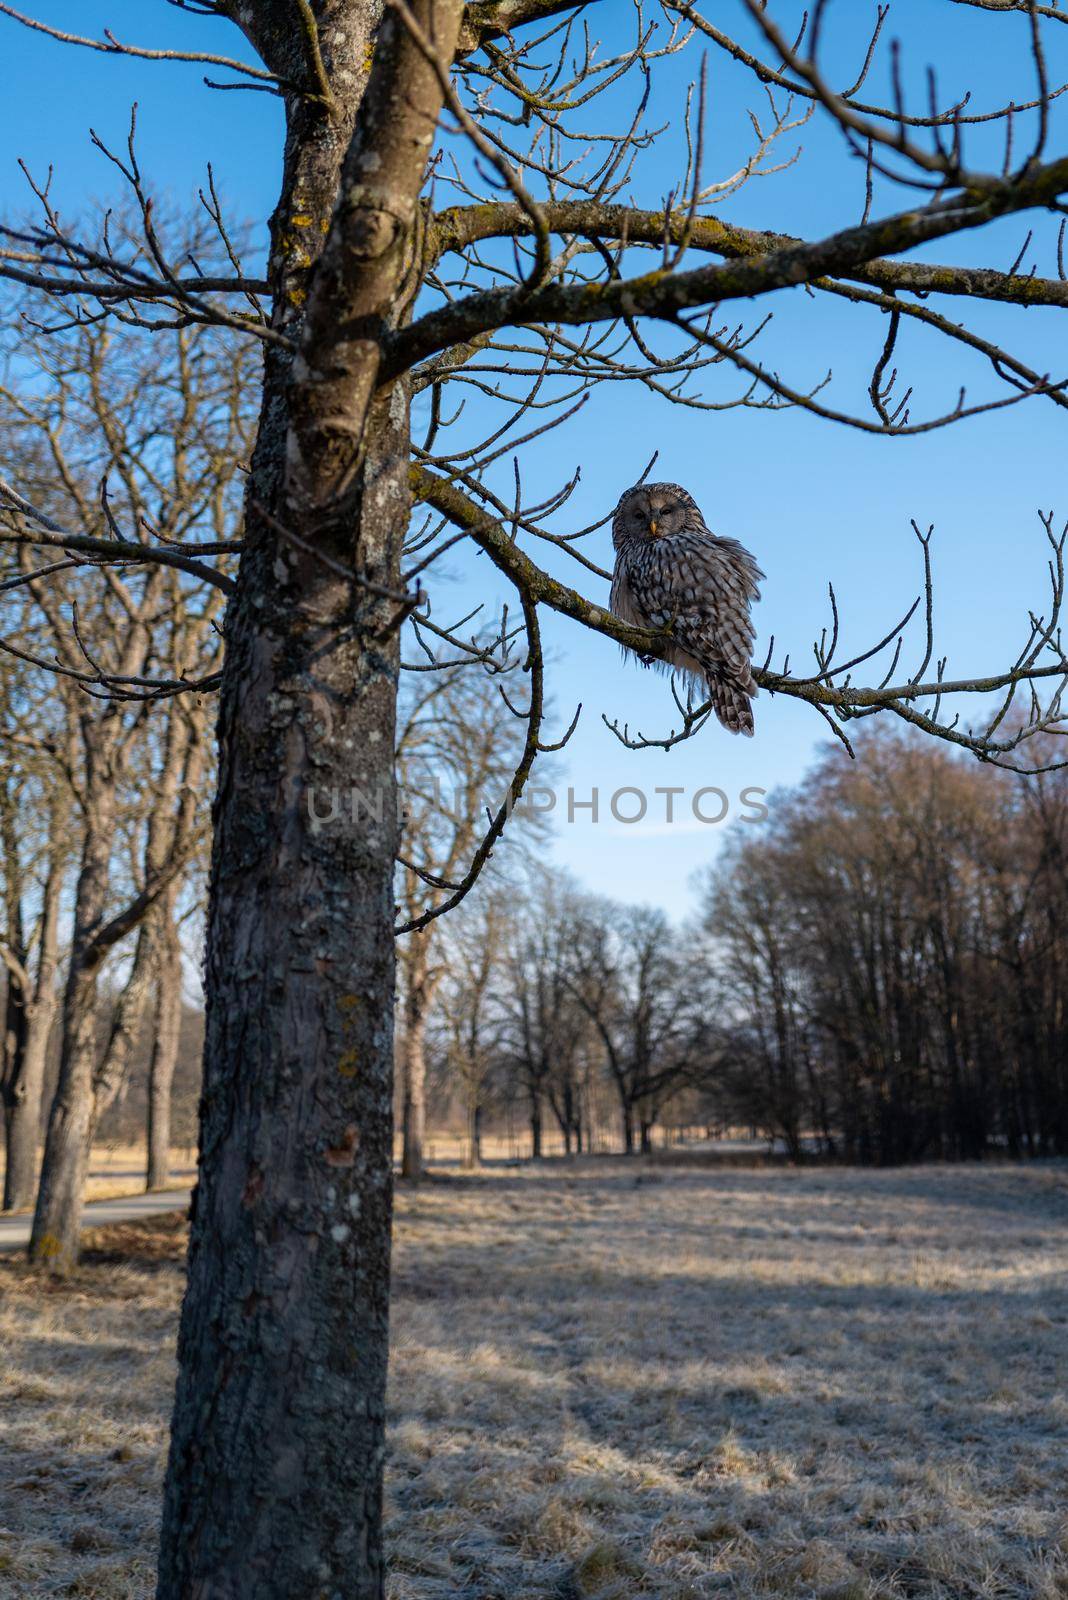 A wild owl sits in a tree near a hiking trail and observes the surroundings.